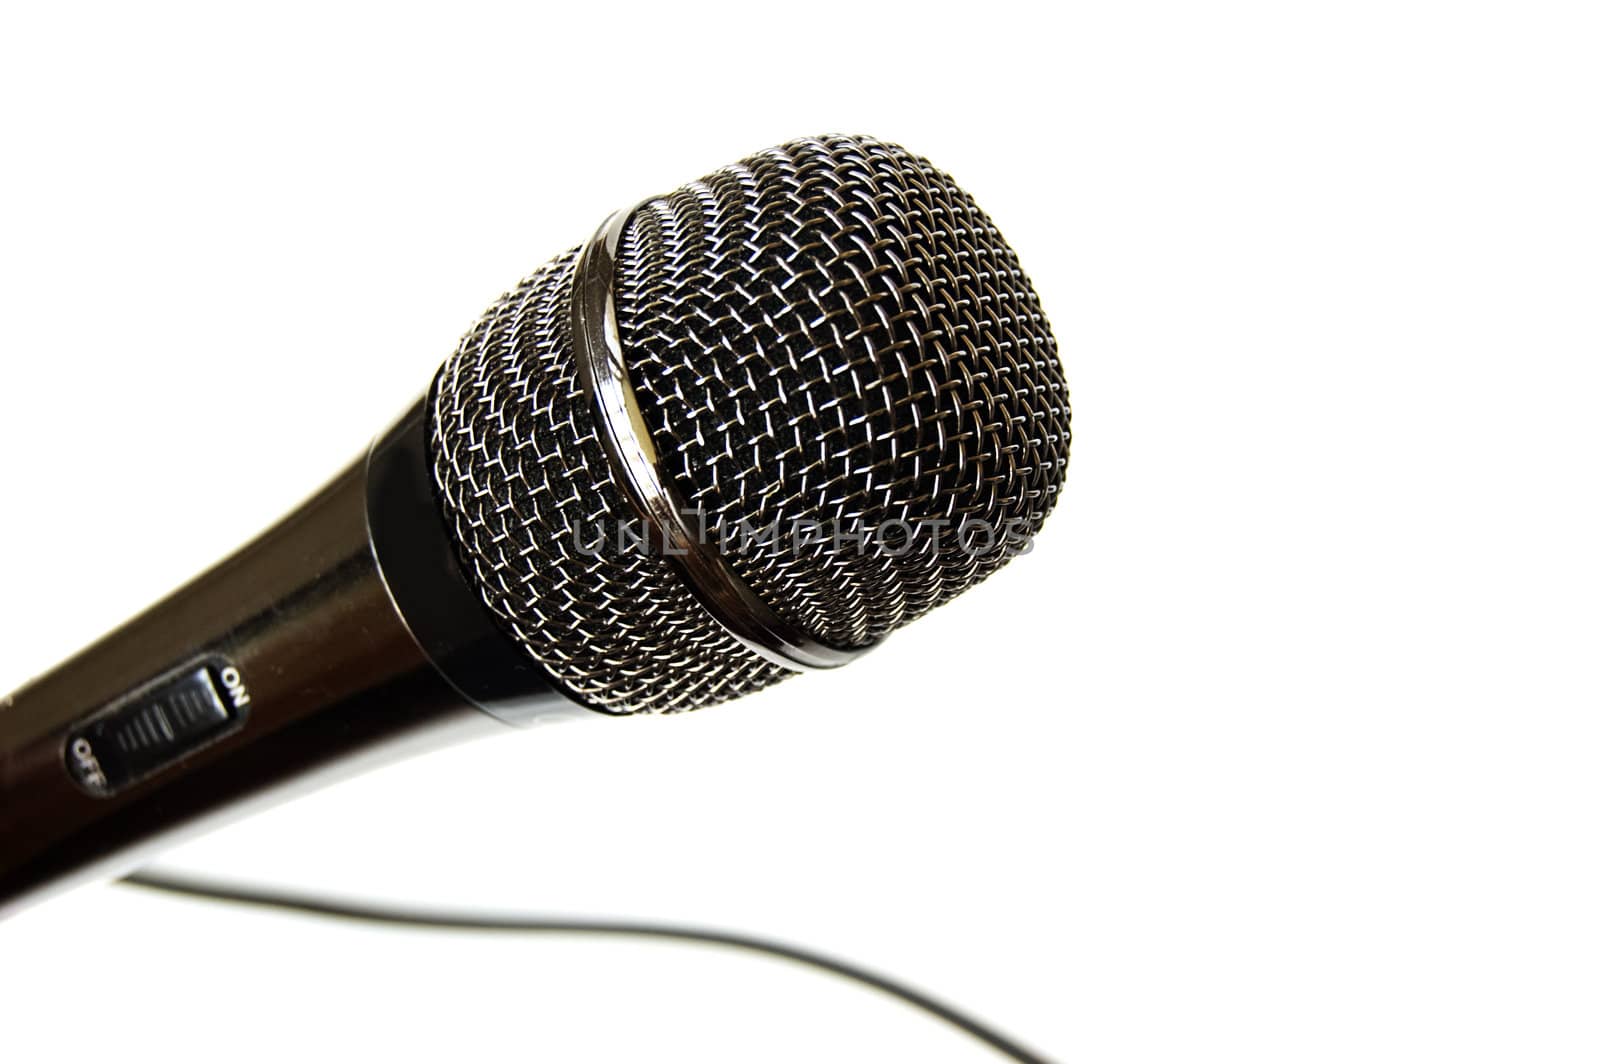 Microphone isolated on the white background